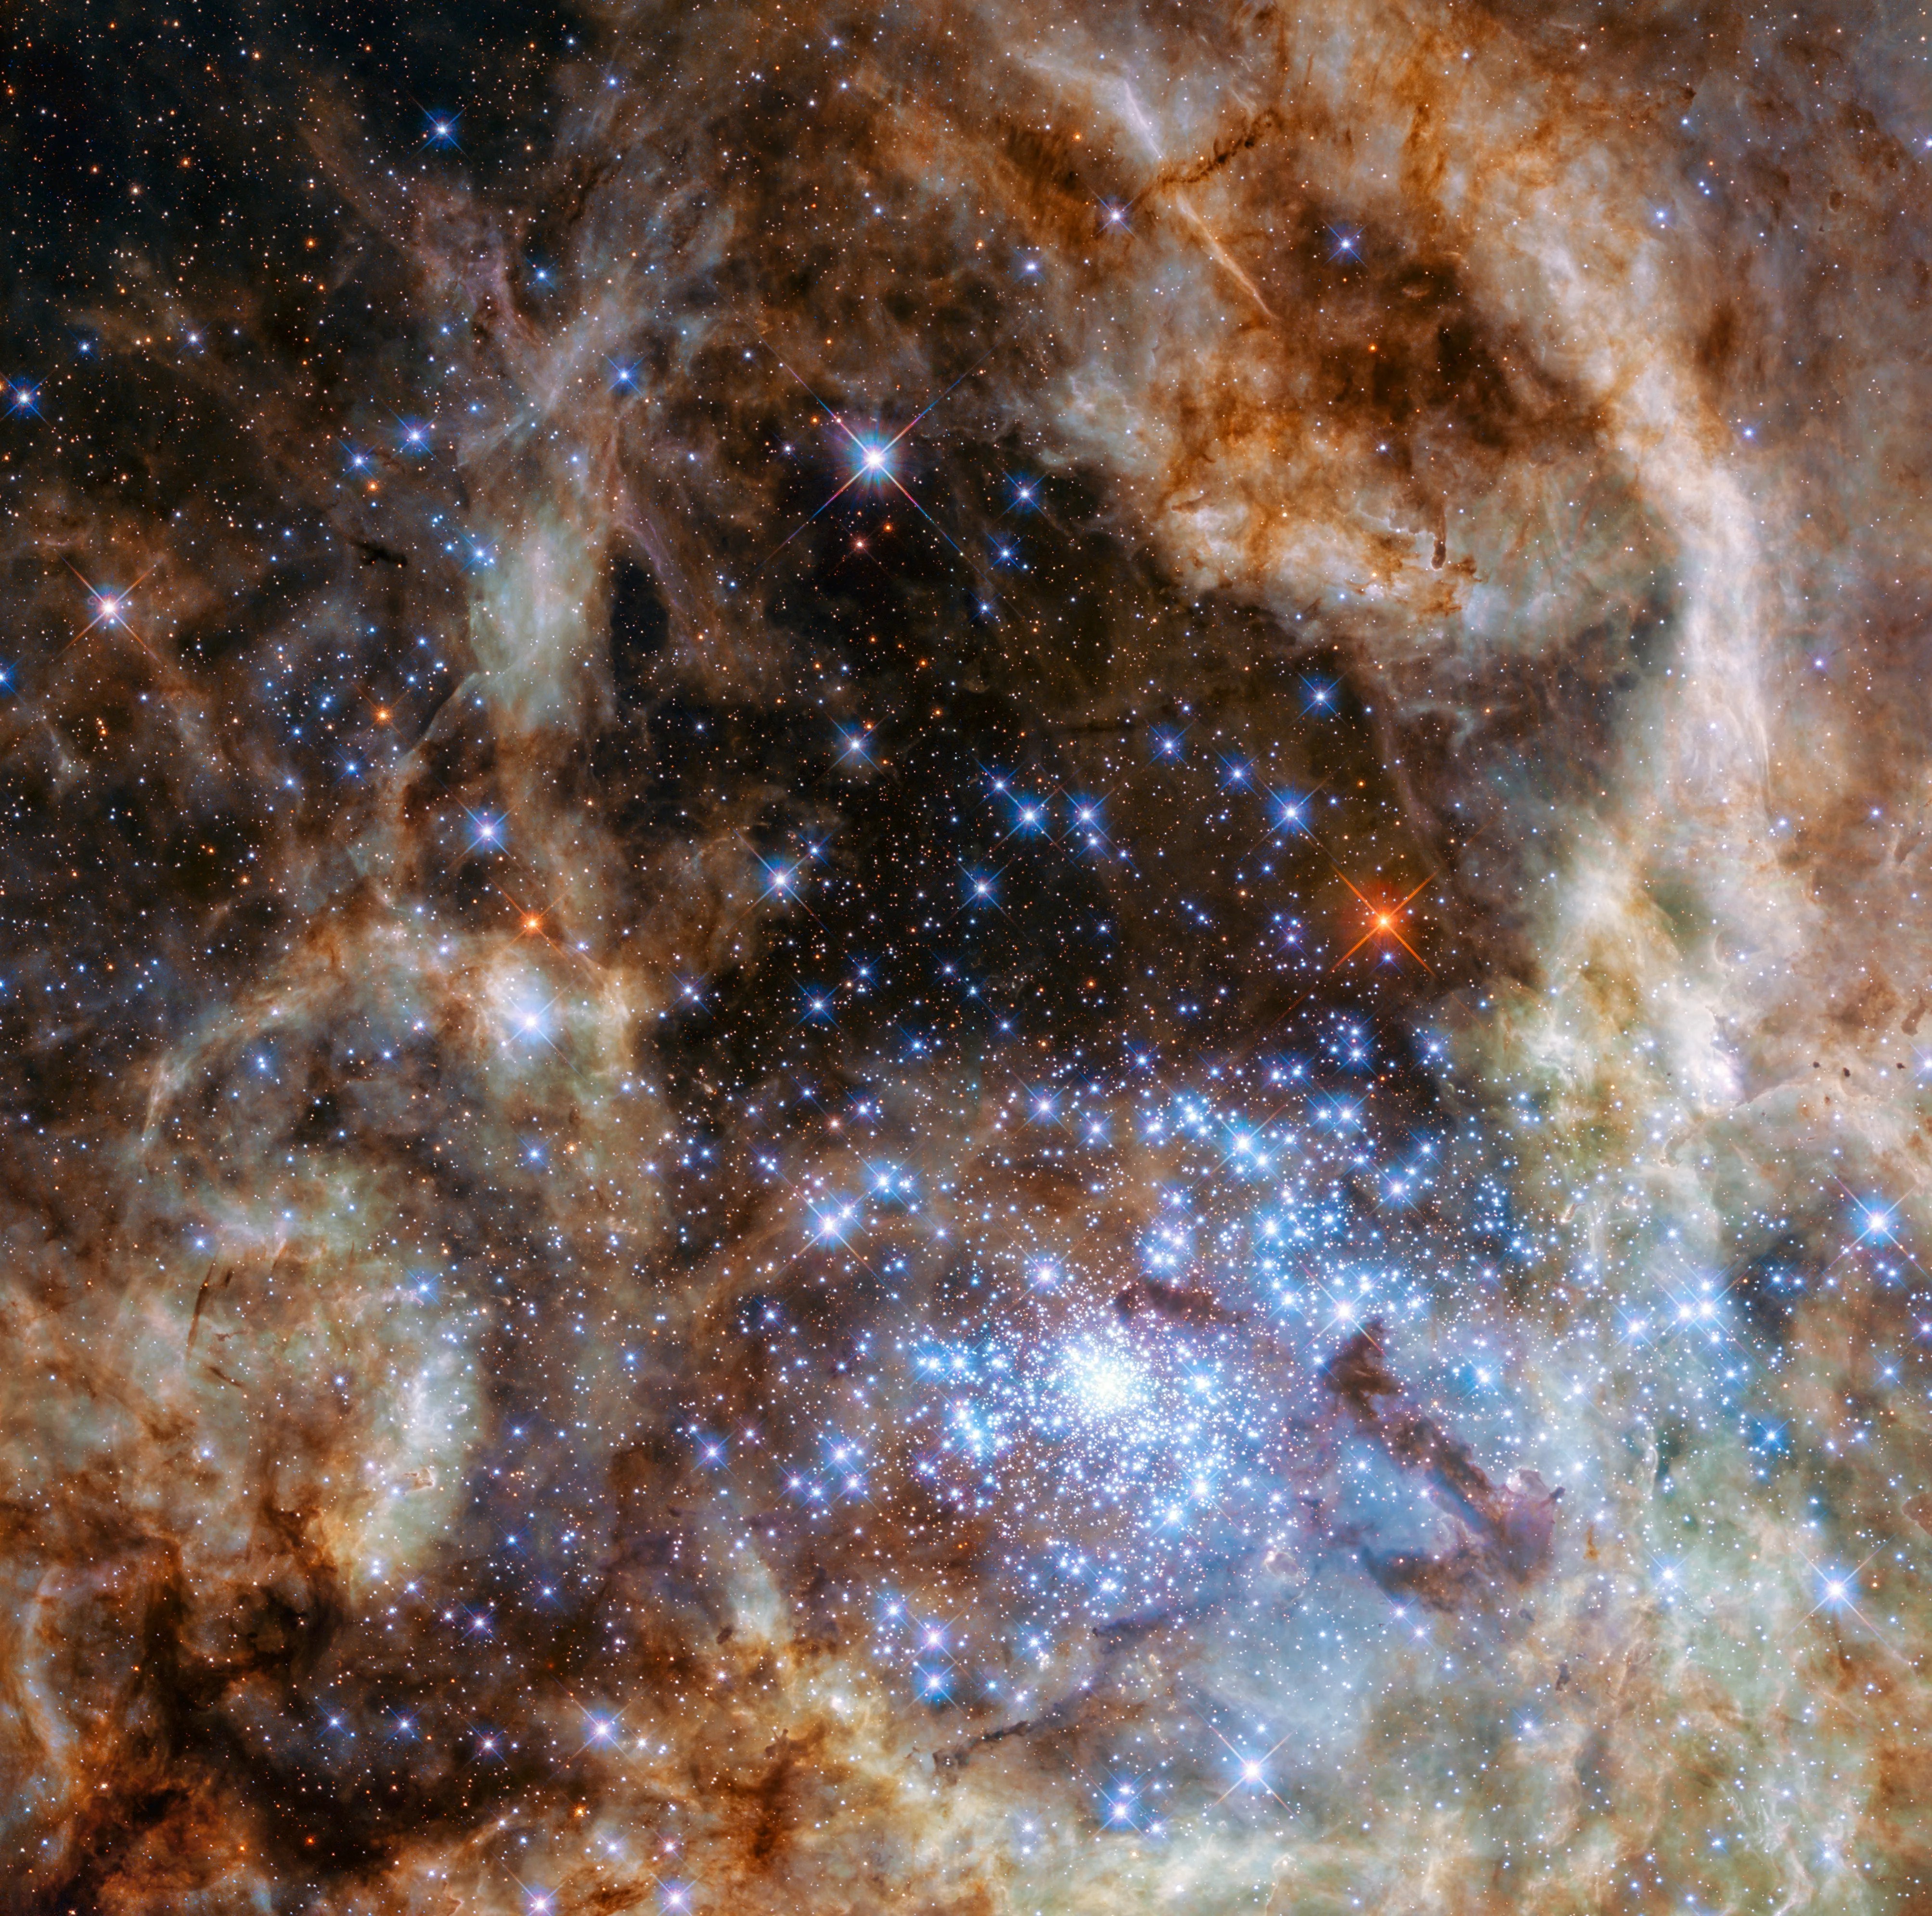 This Hubble image shows the central region of the Tarantula Nebula in the Large Magellanic Cloud